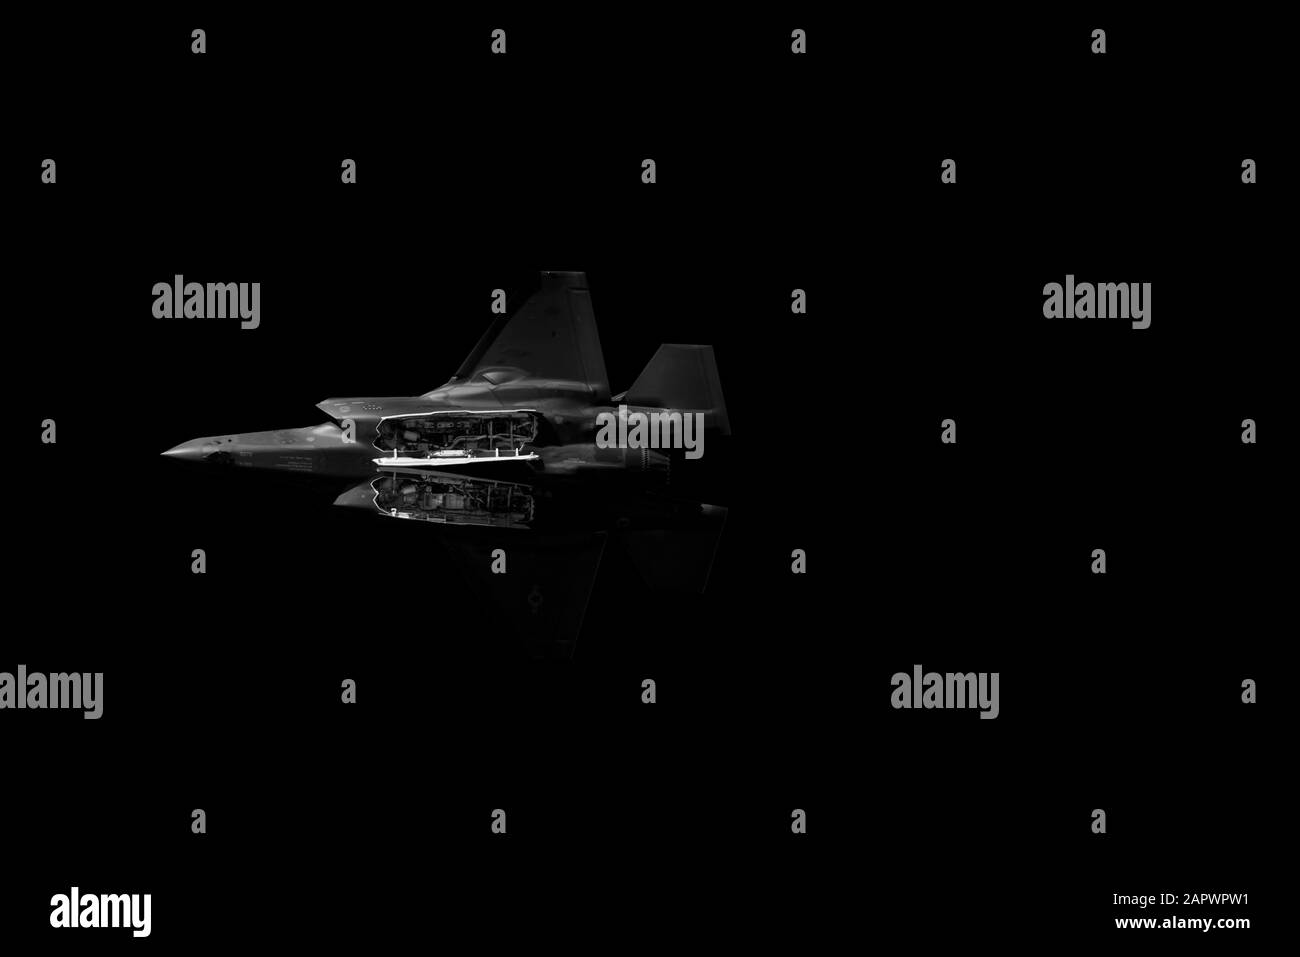 Low angle shot of a single fighter jet plane on dark background Stock Photo